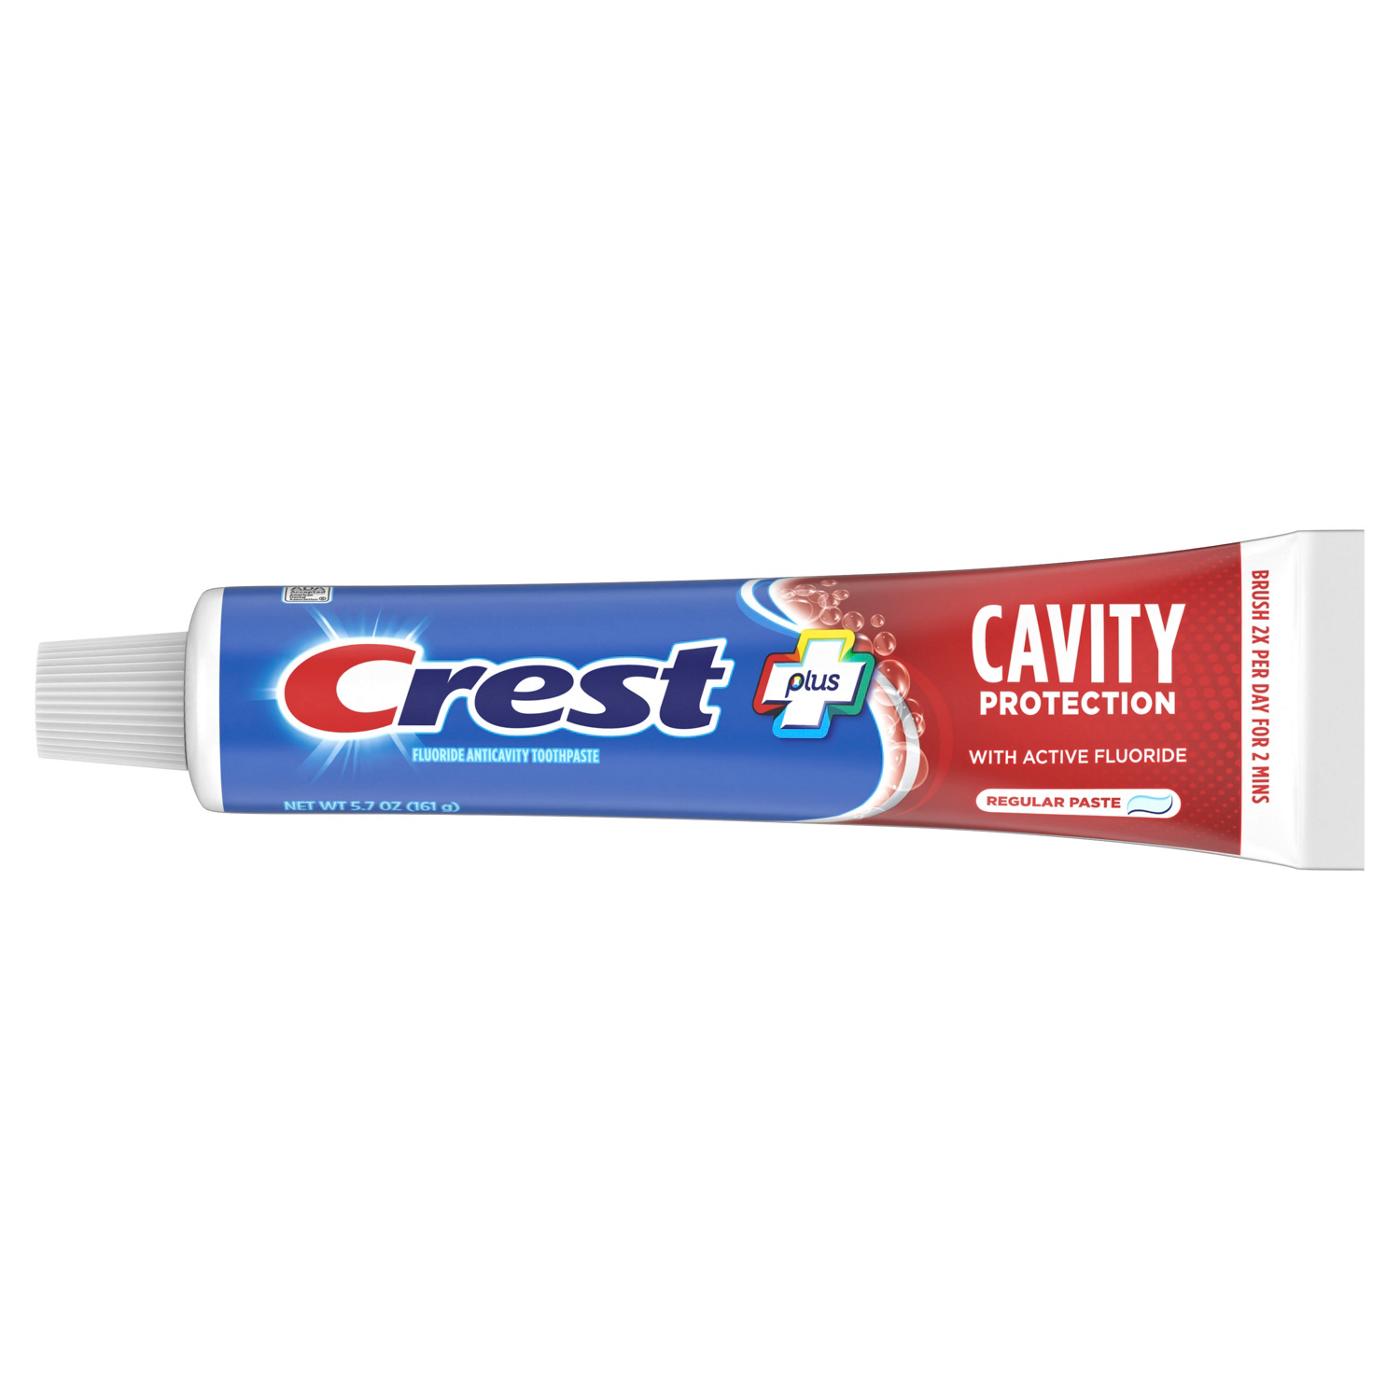 Crest Cavity Protection Regular Toothpaste; image 6 of 9